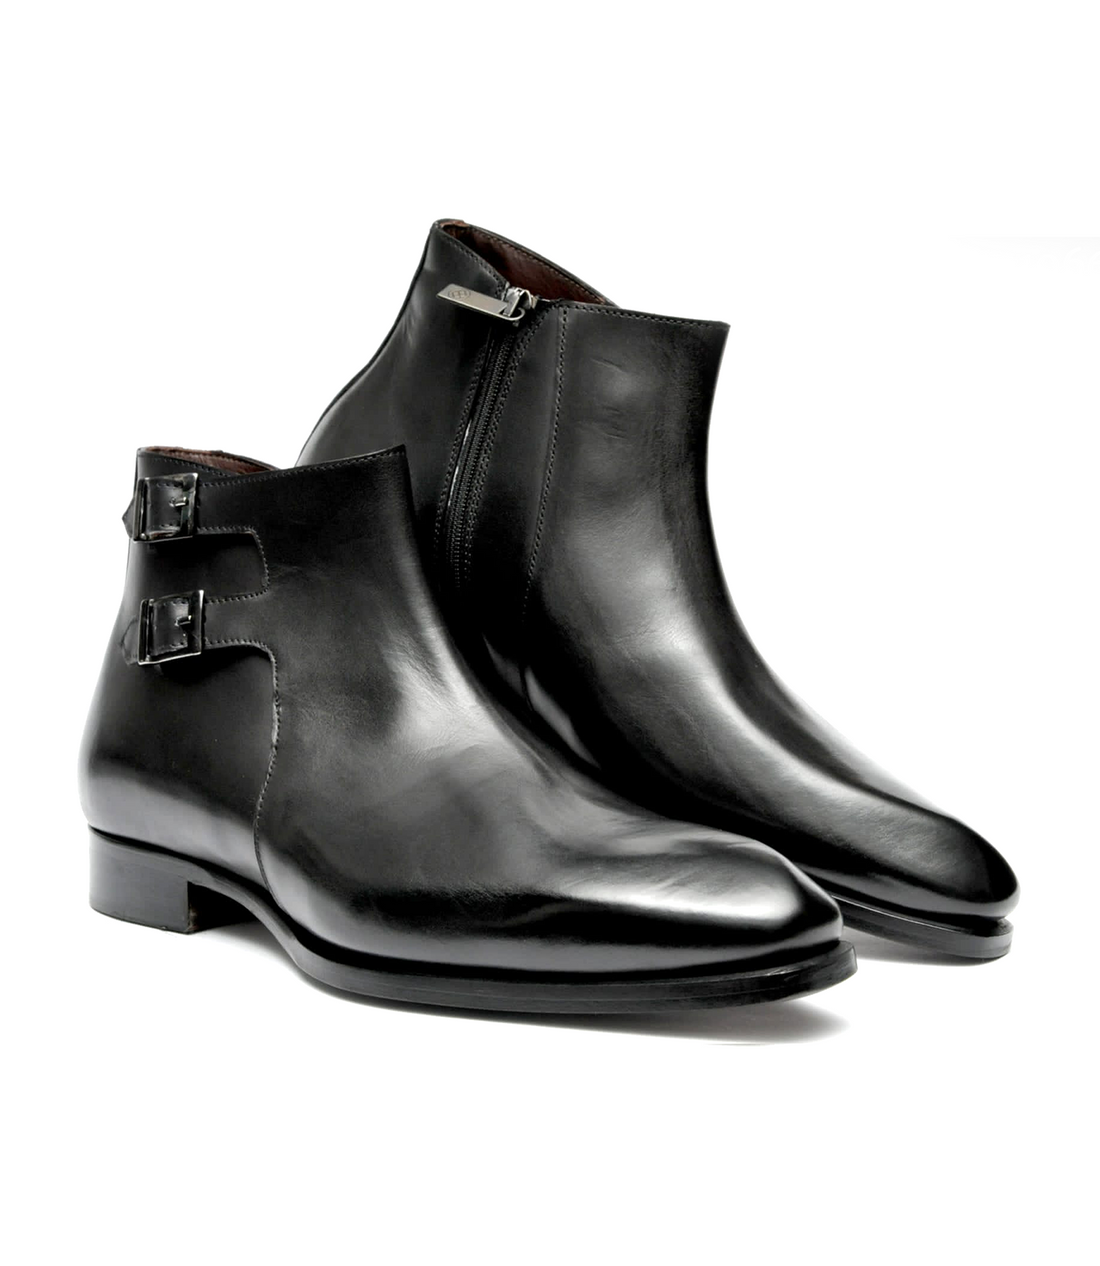 FILANGIERI - BLACK LEATHER ANKLE BOOT WITH DOUBLE MONK & ZIPPER